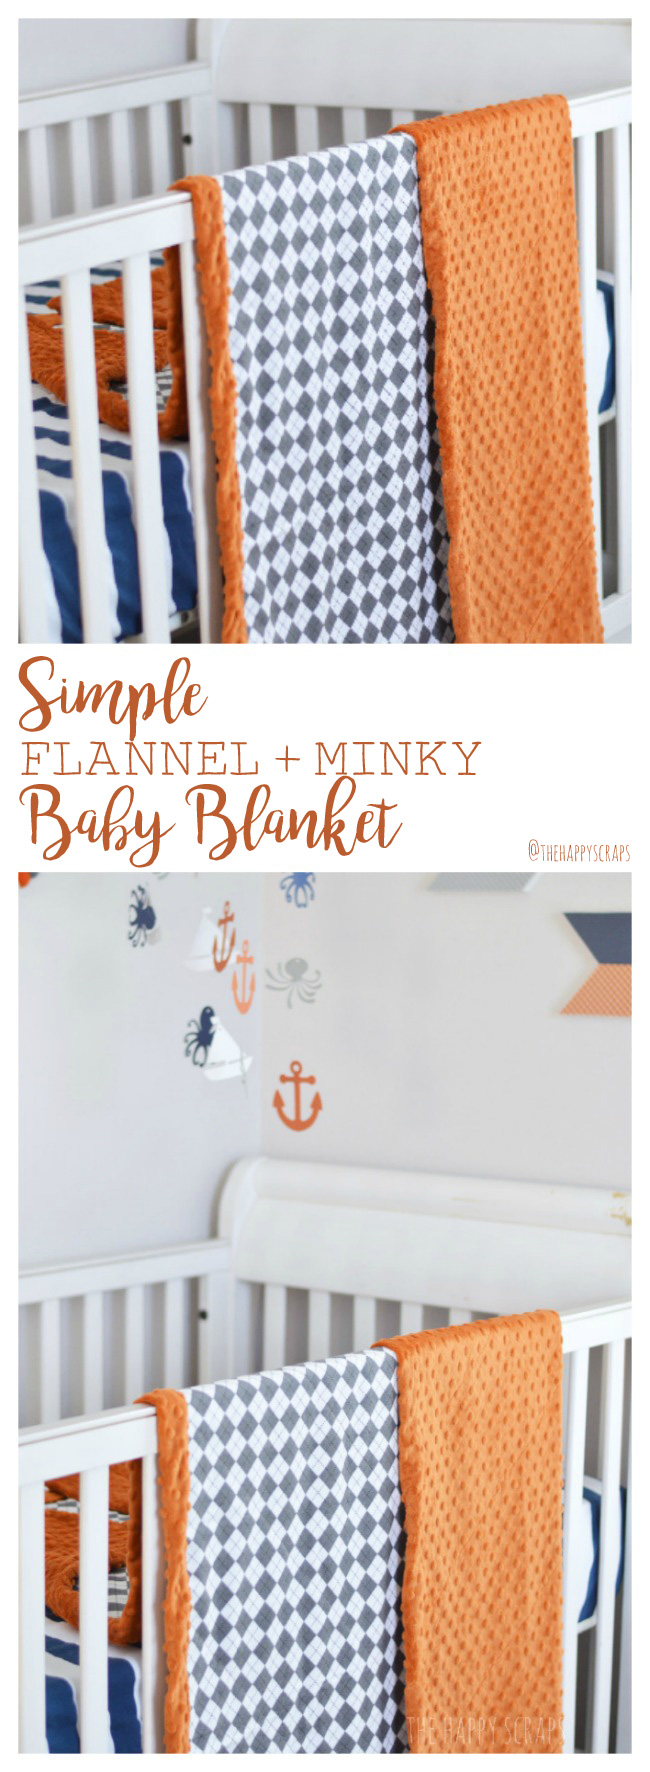 This Simple Flannel + Minky Baby Blanket is so soft and it's easy to make too. Grab your supplies and get to work. Minky is great for making baby blankets.